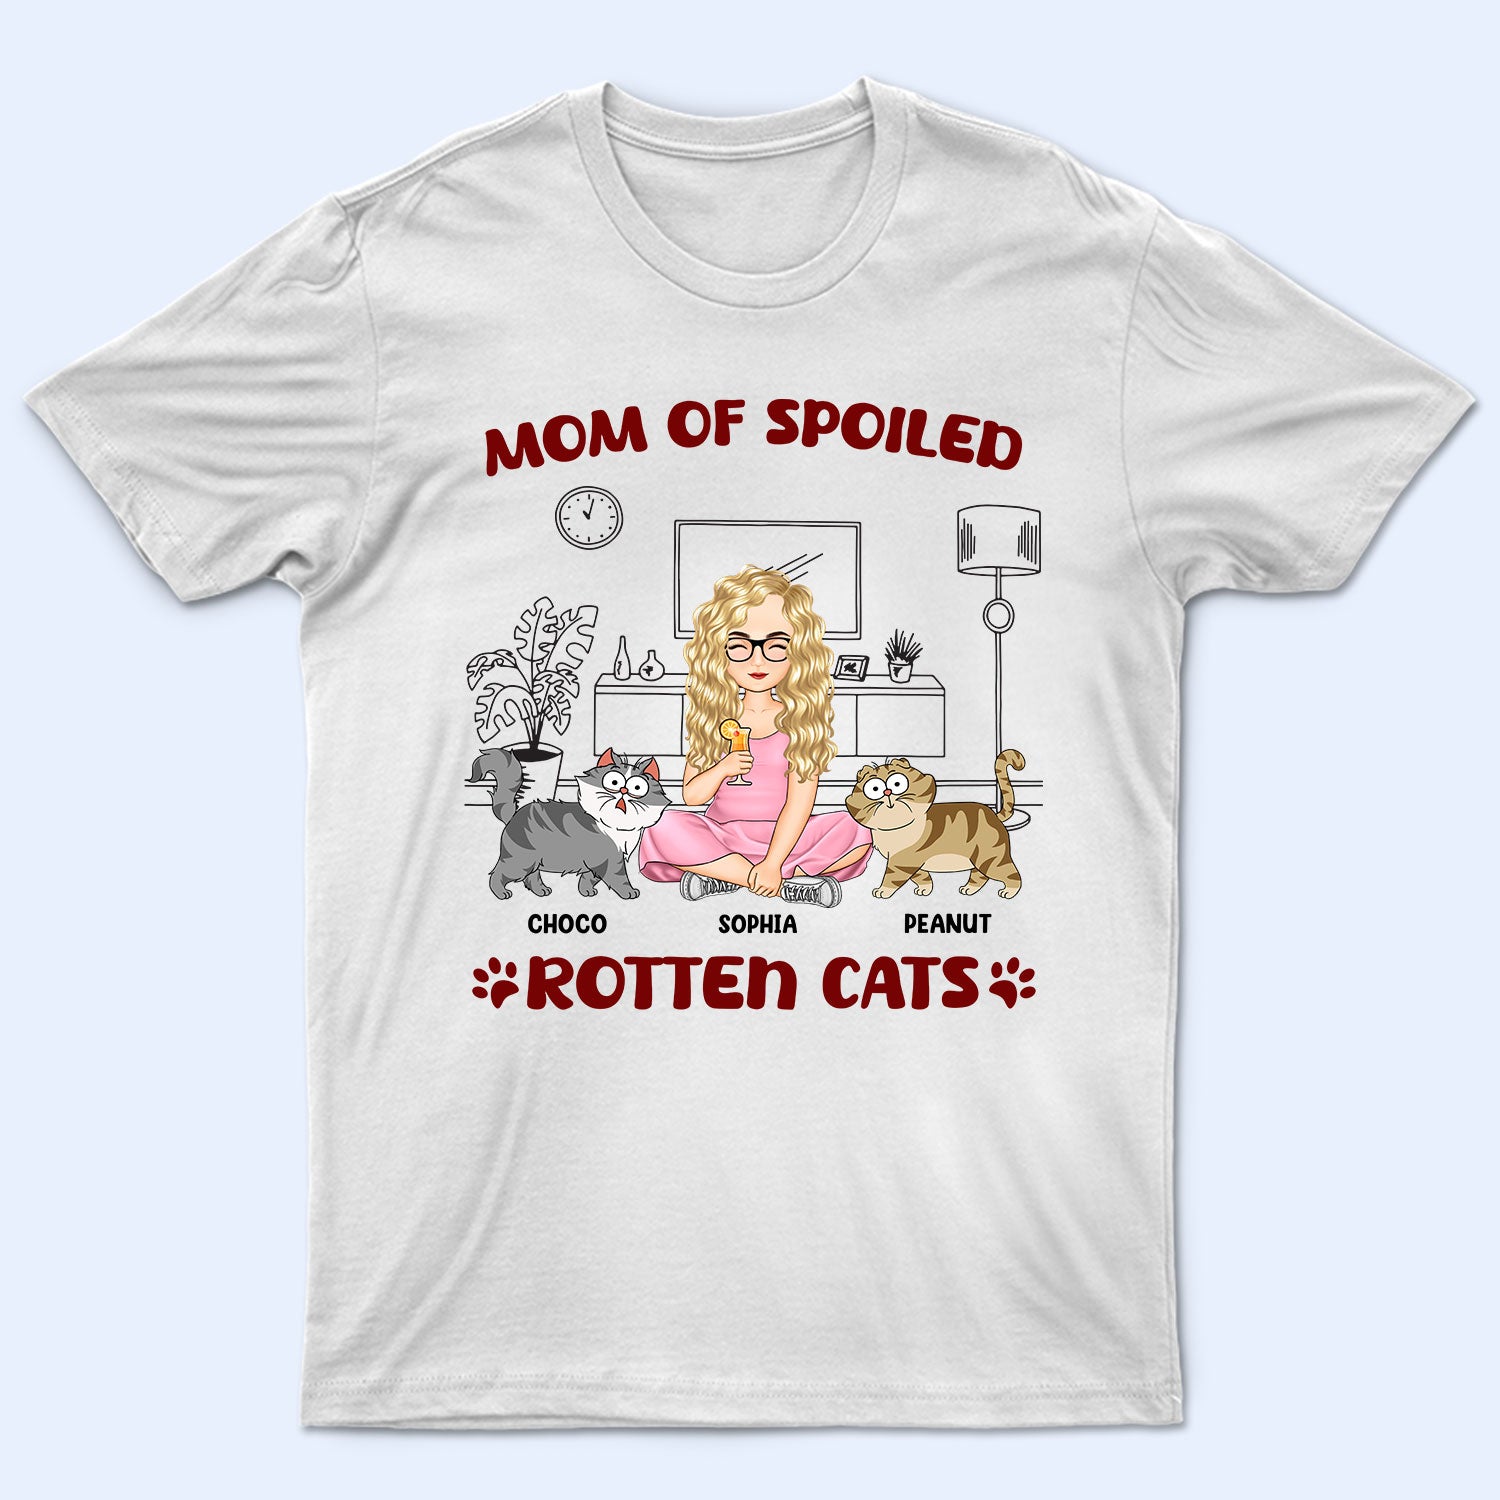 Mom Of Spoiled Rotten Cats Cartoon Style - Gift For Cat Mom, Cat Lovers - Personalized T Shirt